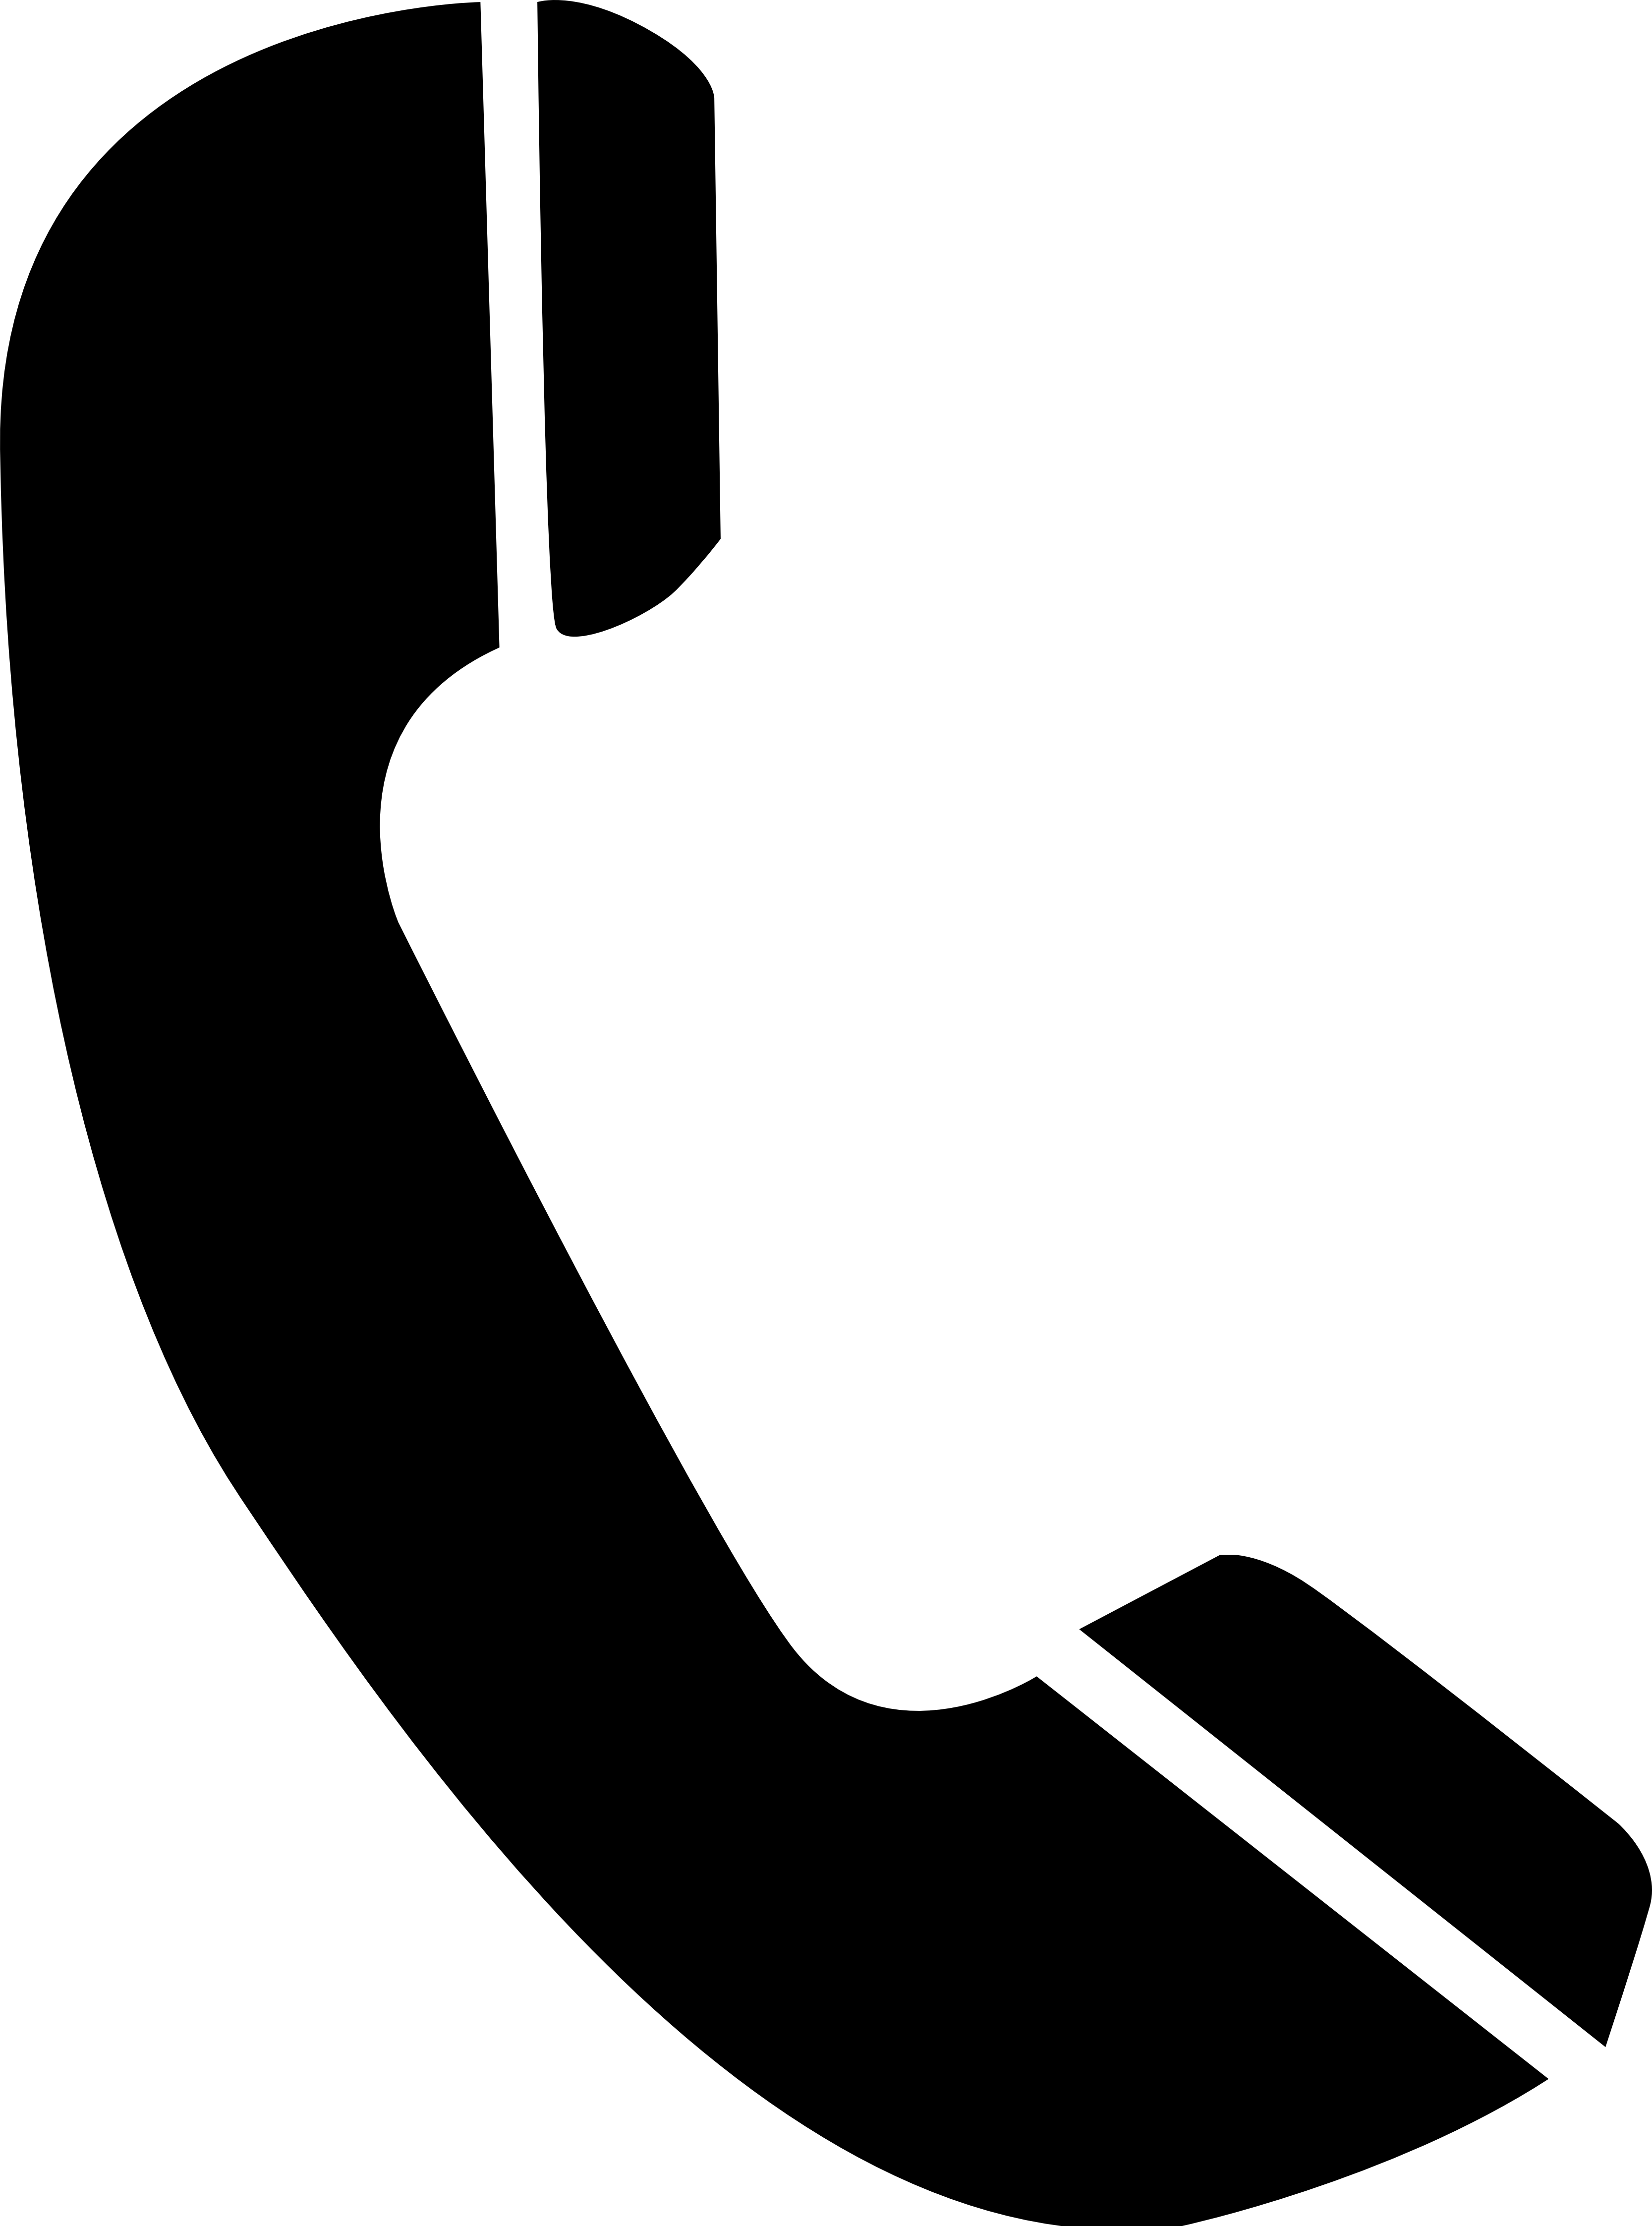 Simple Phone Logo - Download TELEPHONE Free PNG transparent image and clipart